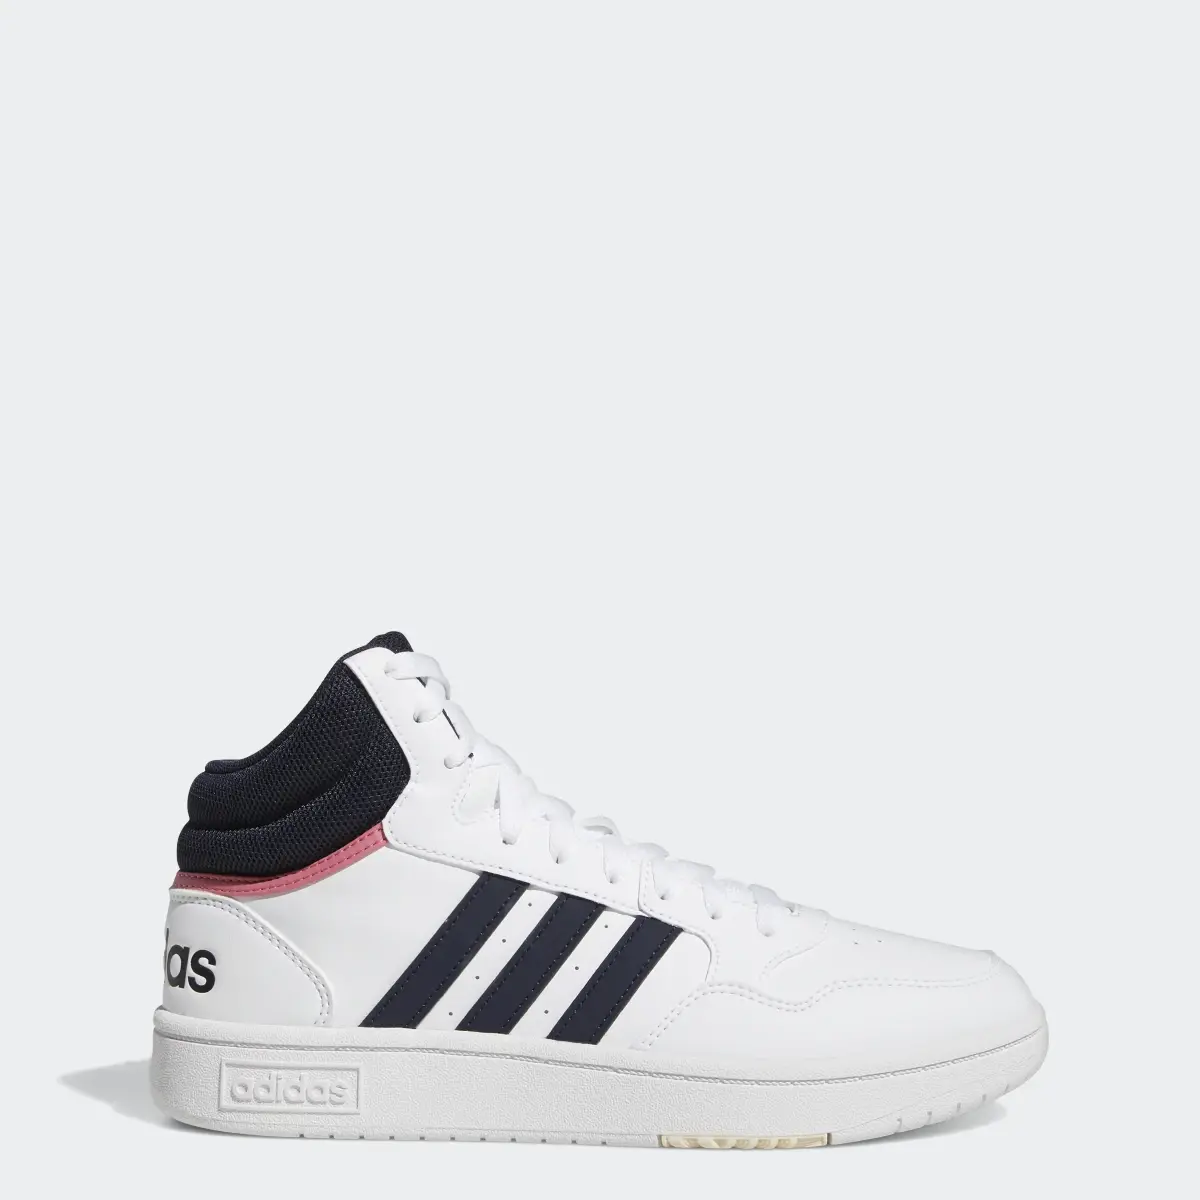 Adidas Hoops 3.0 Mid Classic Shoes. 1